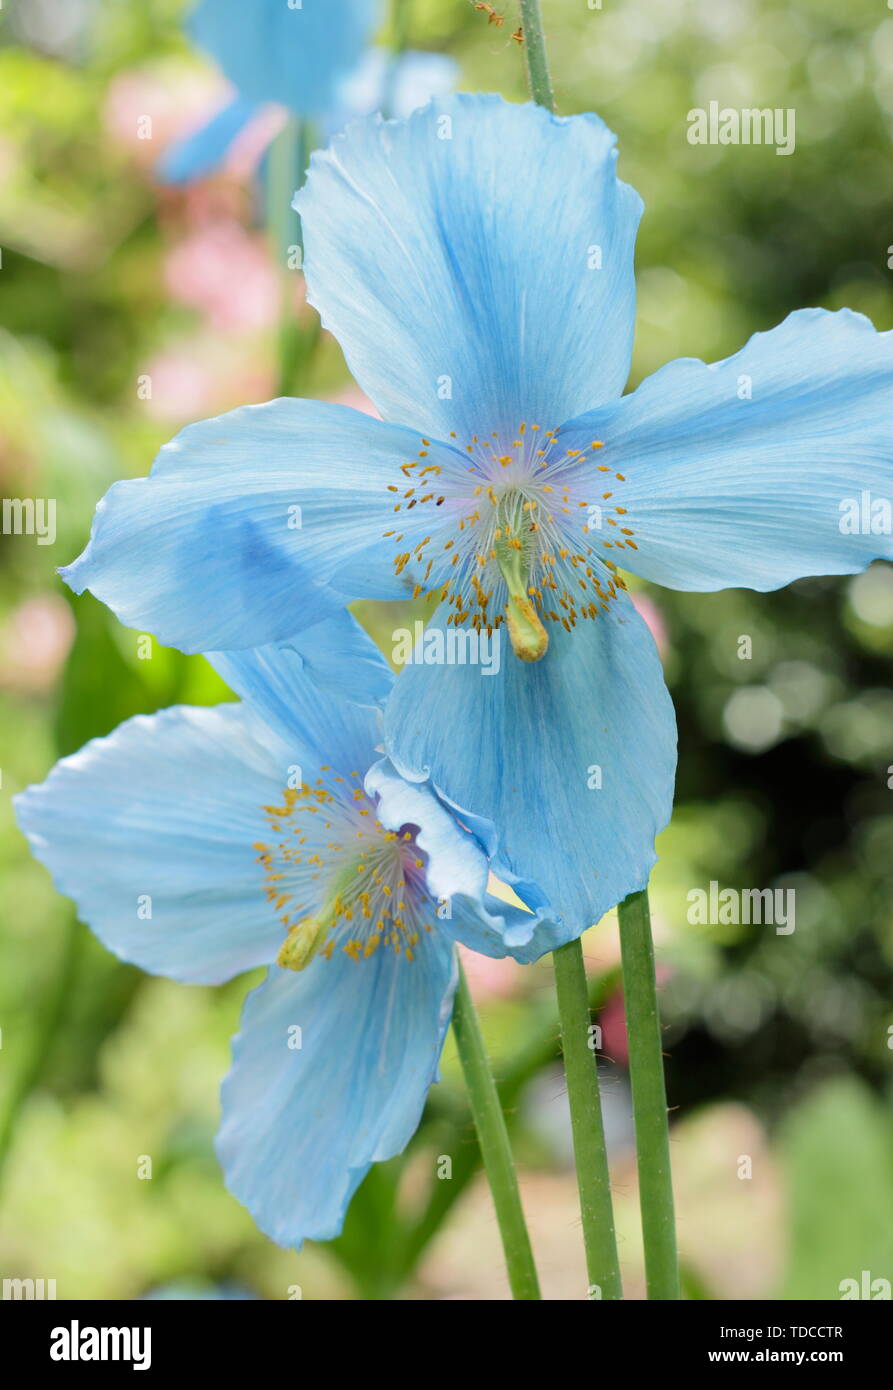 Mevconopsis 'Lingholm'. Himalayan blue poppies flowering in May in a woodland garden, UK Stock Photo